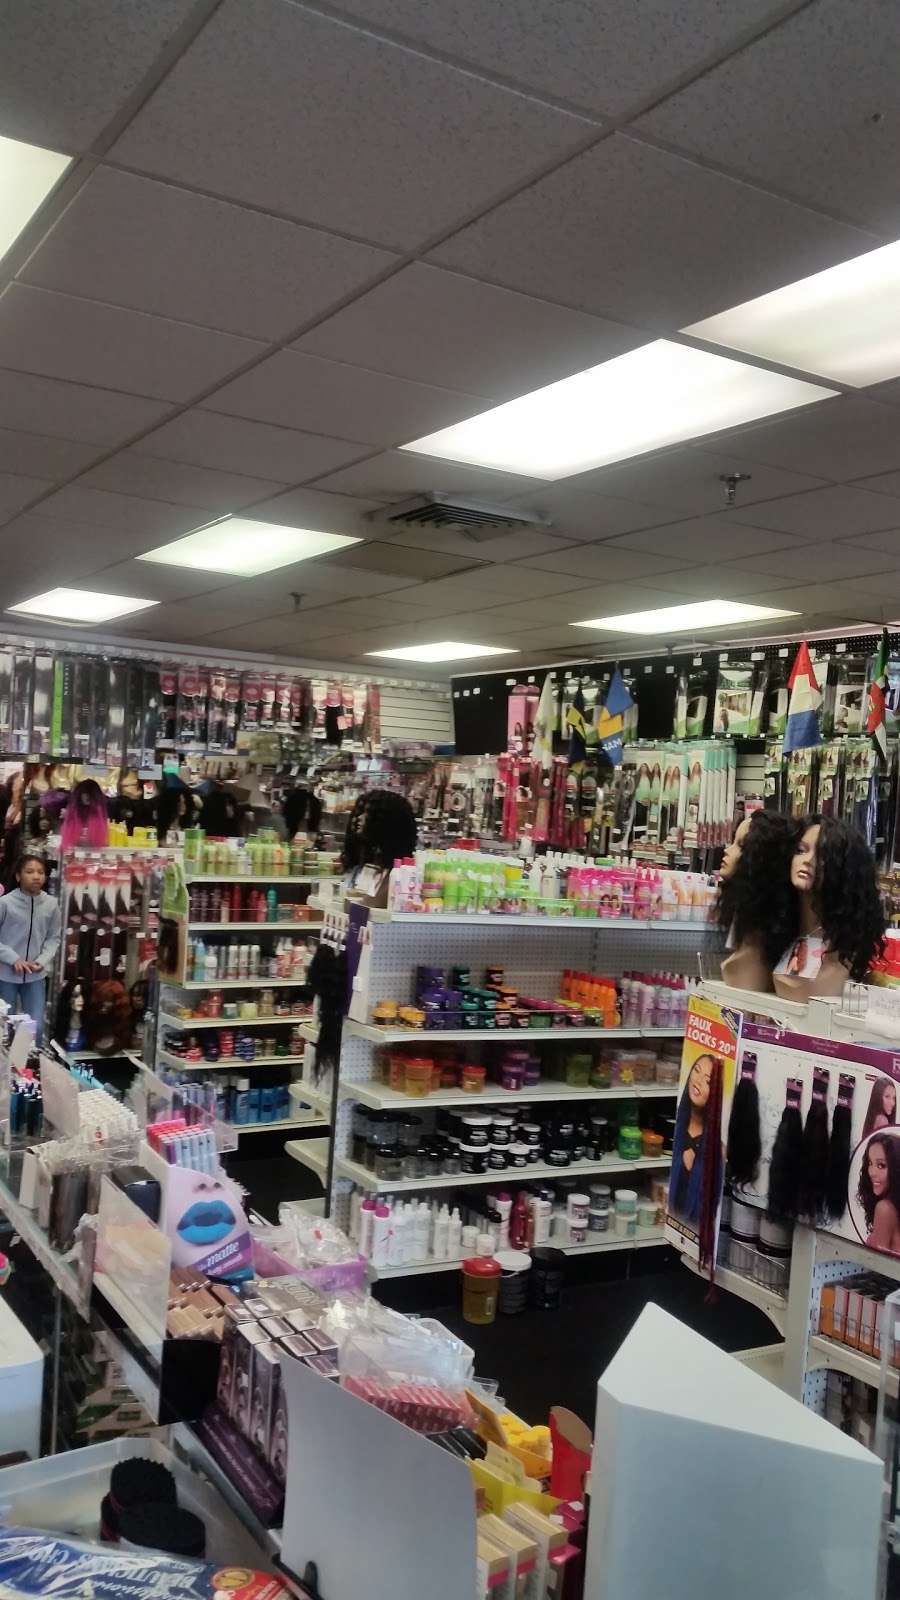 Strouds Beauty Supplies | 1120 N 9th St, Stroudsburg, PA 18360 | Phone: (570) 420-1965